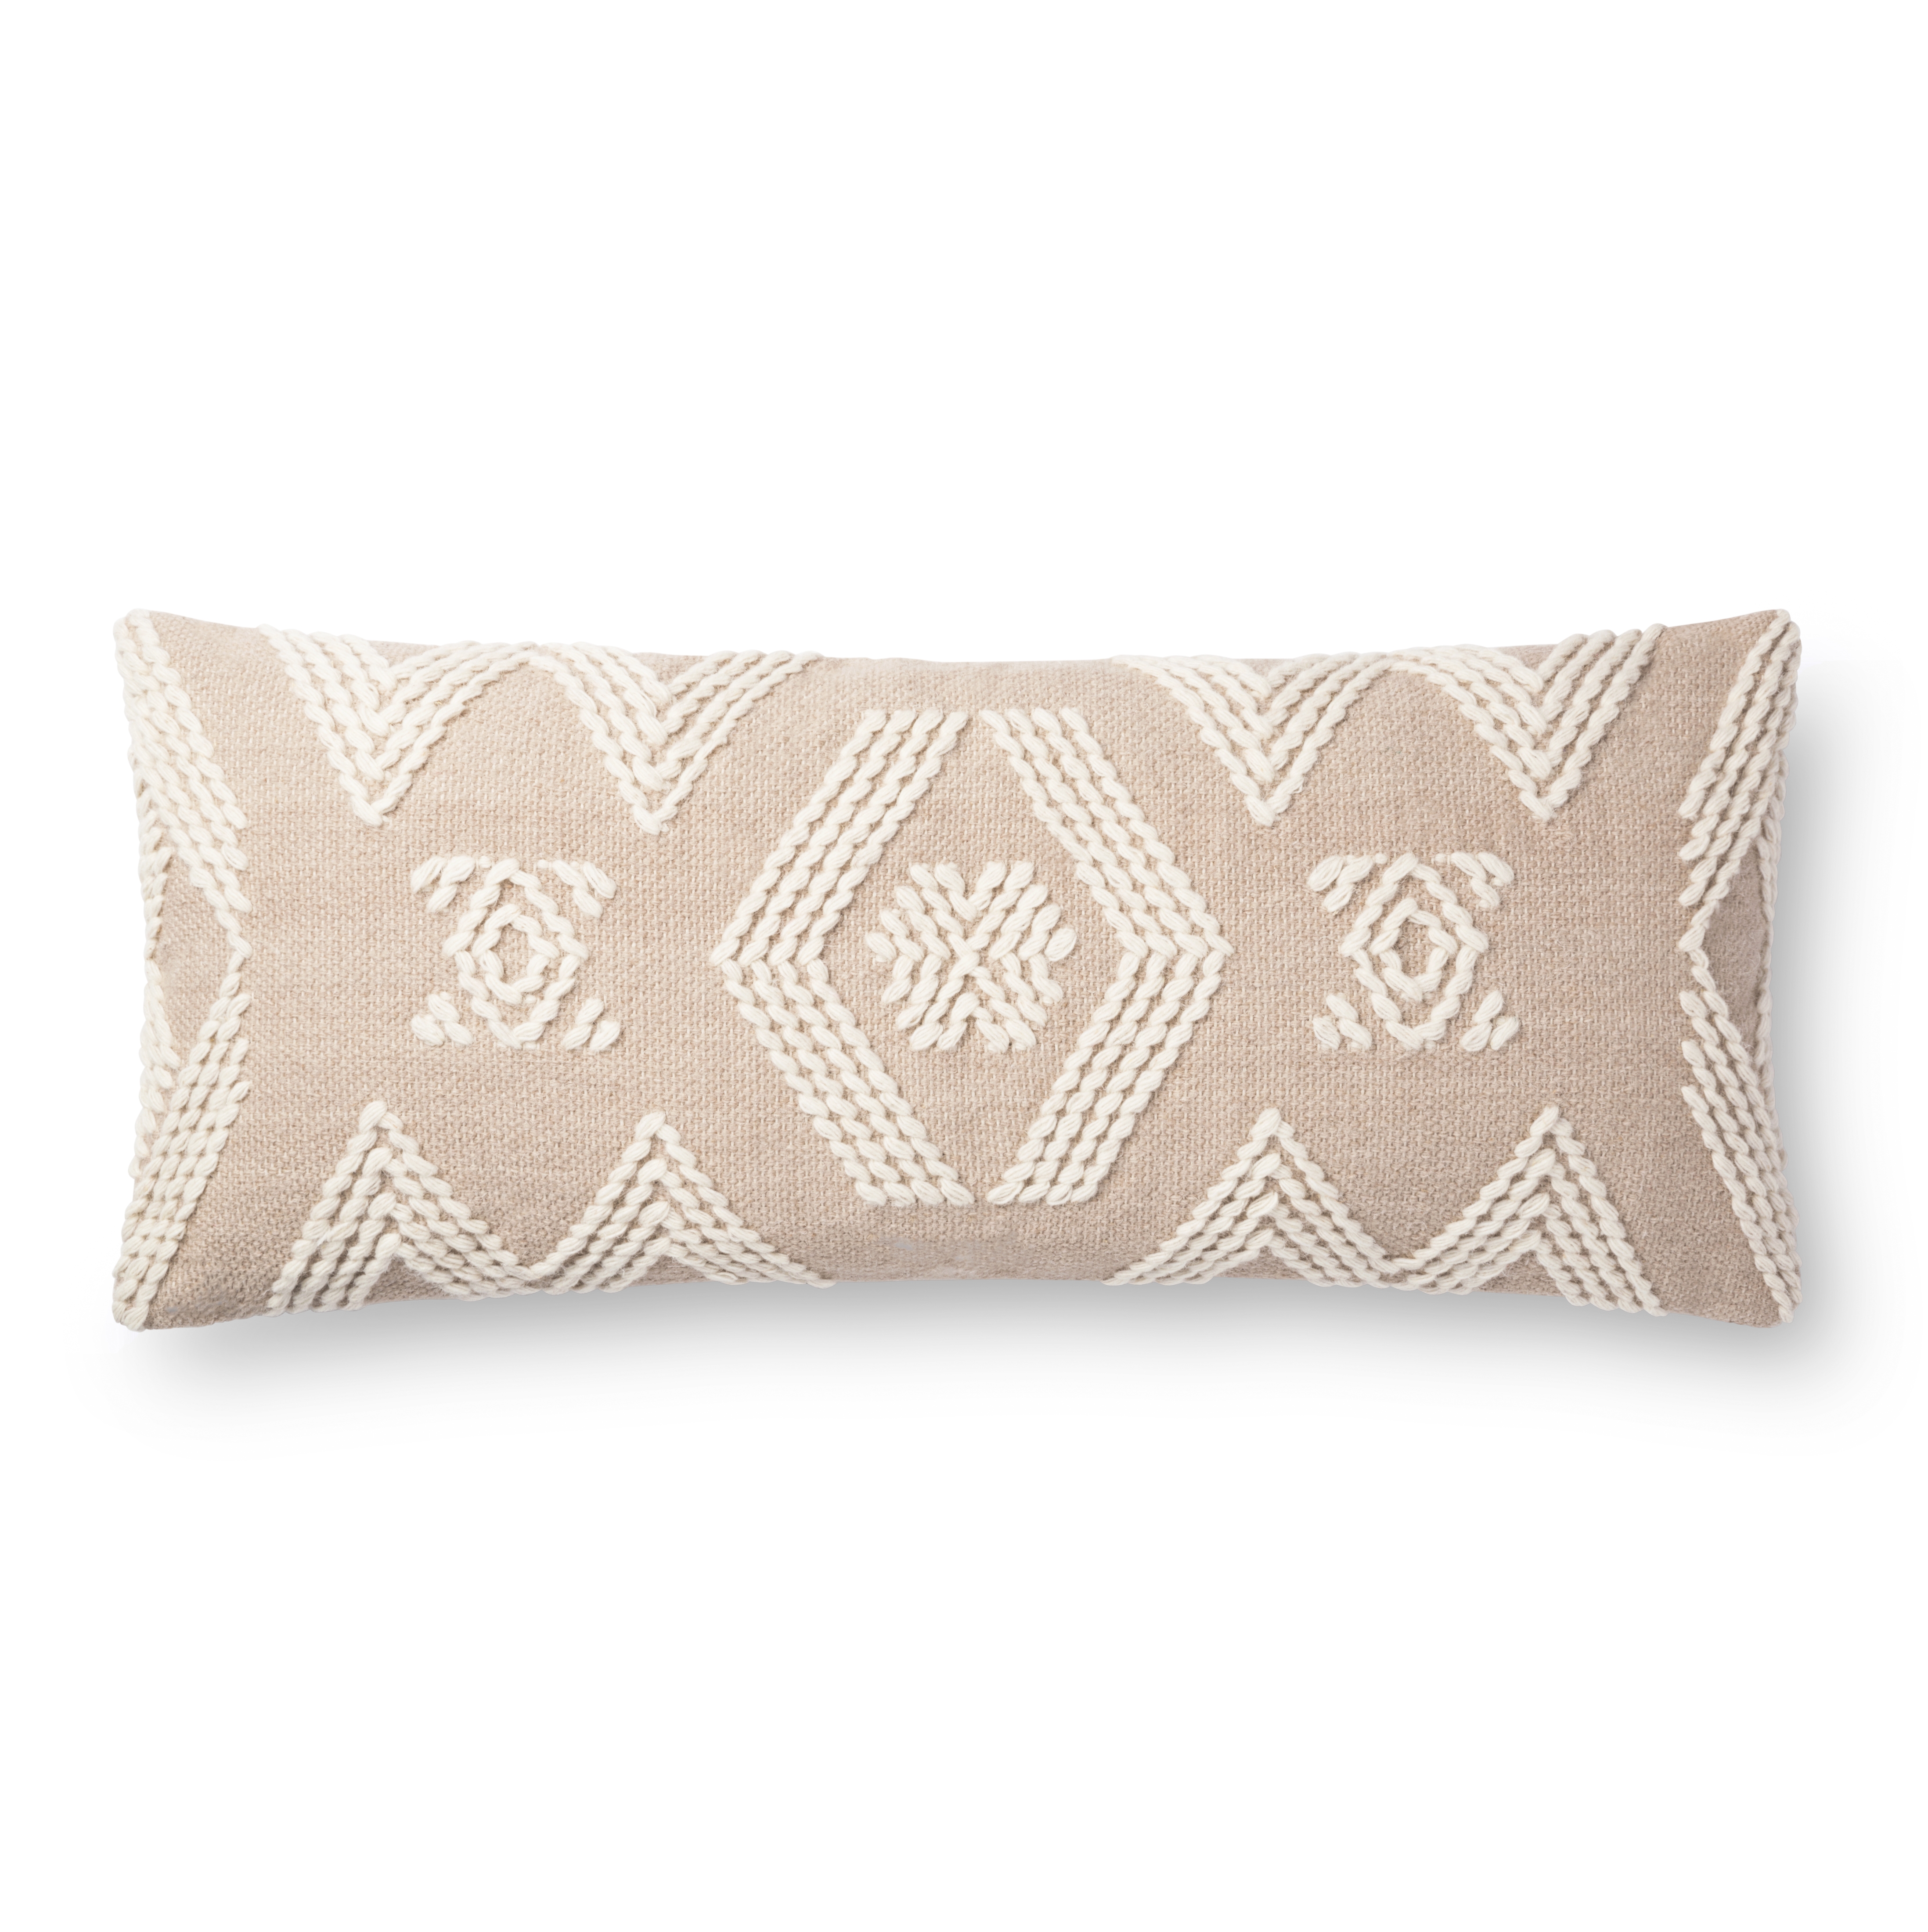 Magnolia Home by Joanna Gaines x Loloi Pillows P1105 Sand / Ivory 13" x 35" Cover Only - Image 1